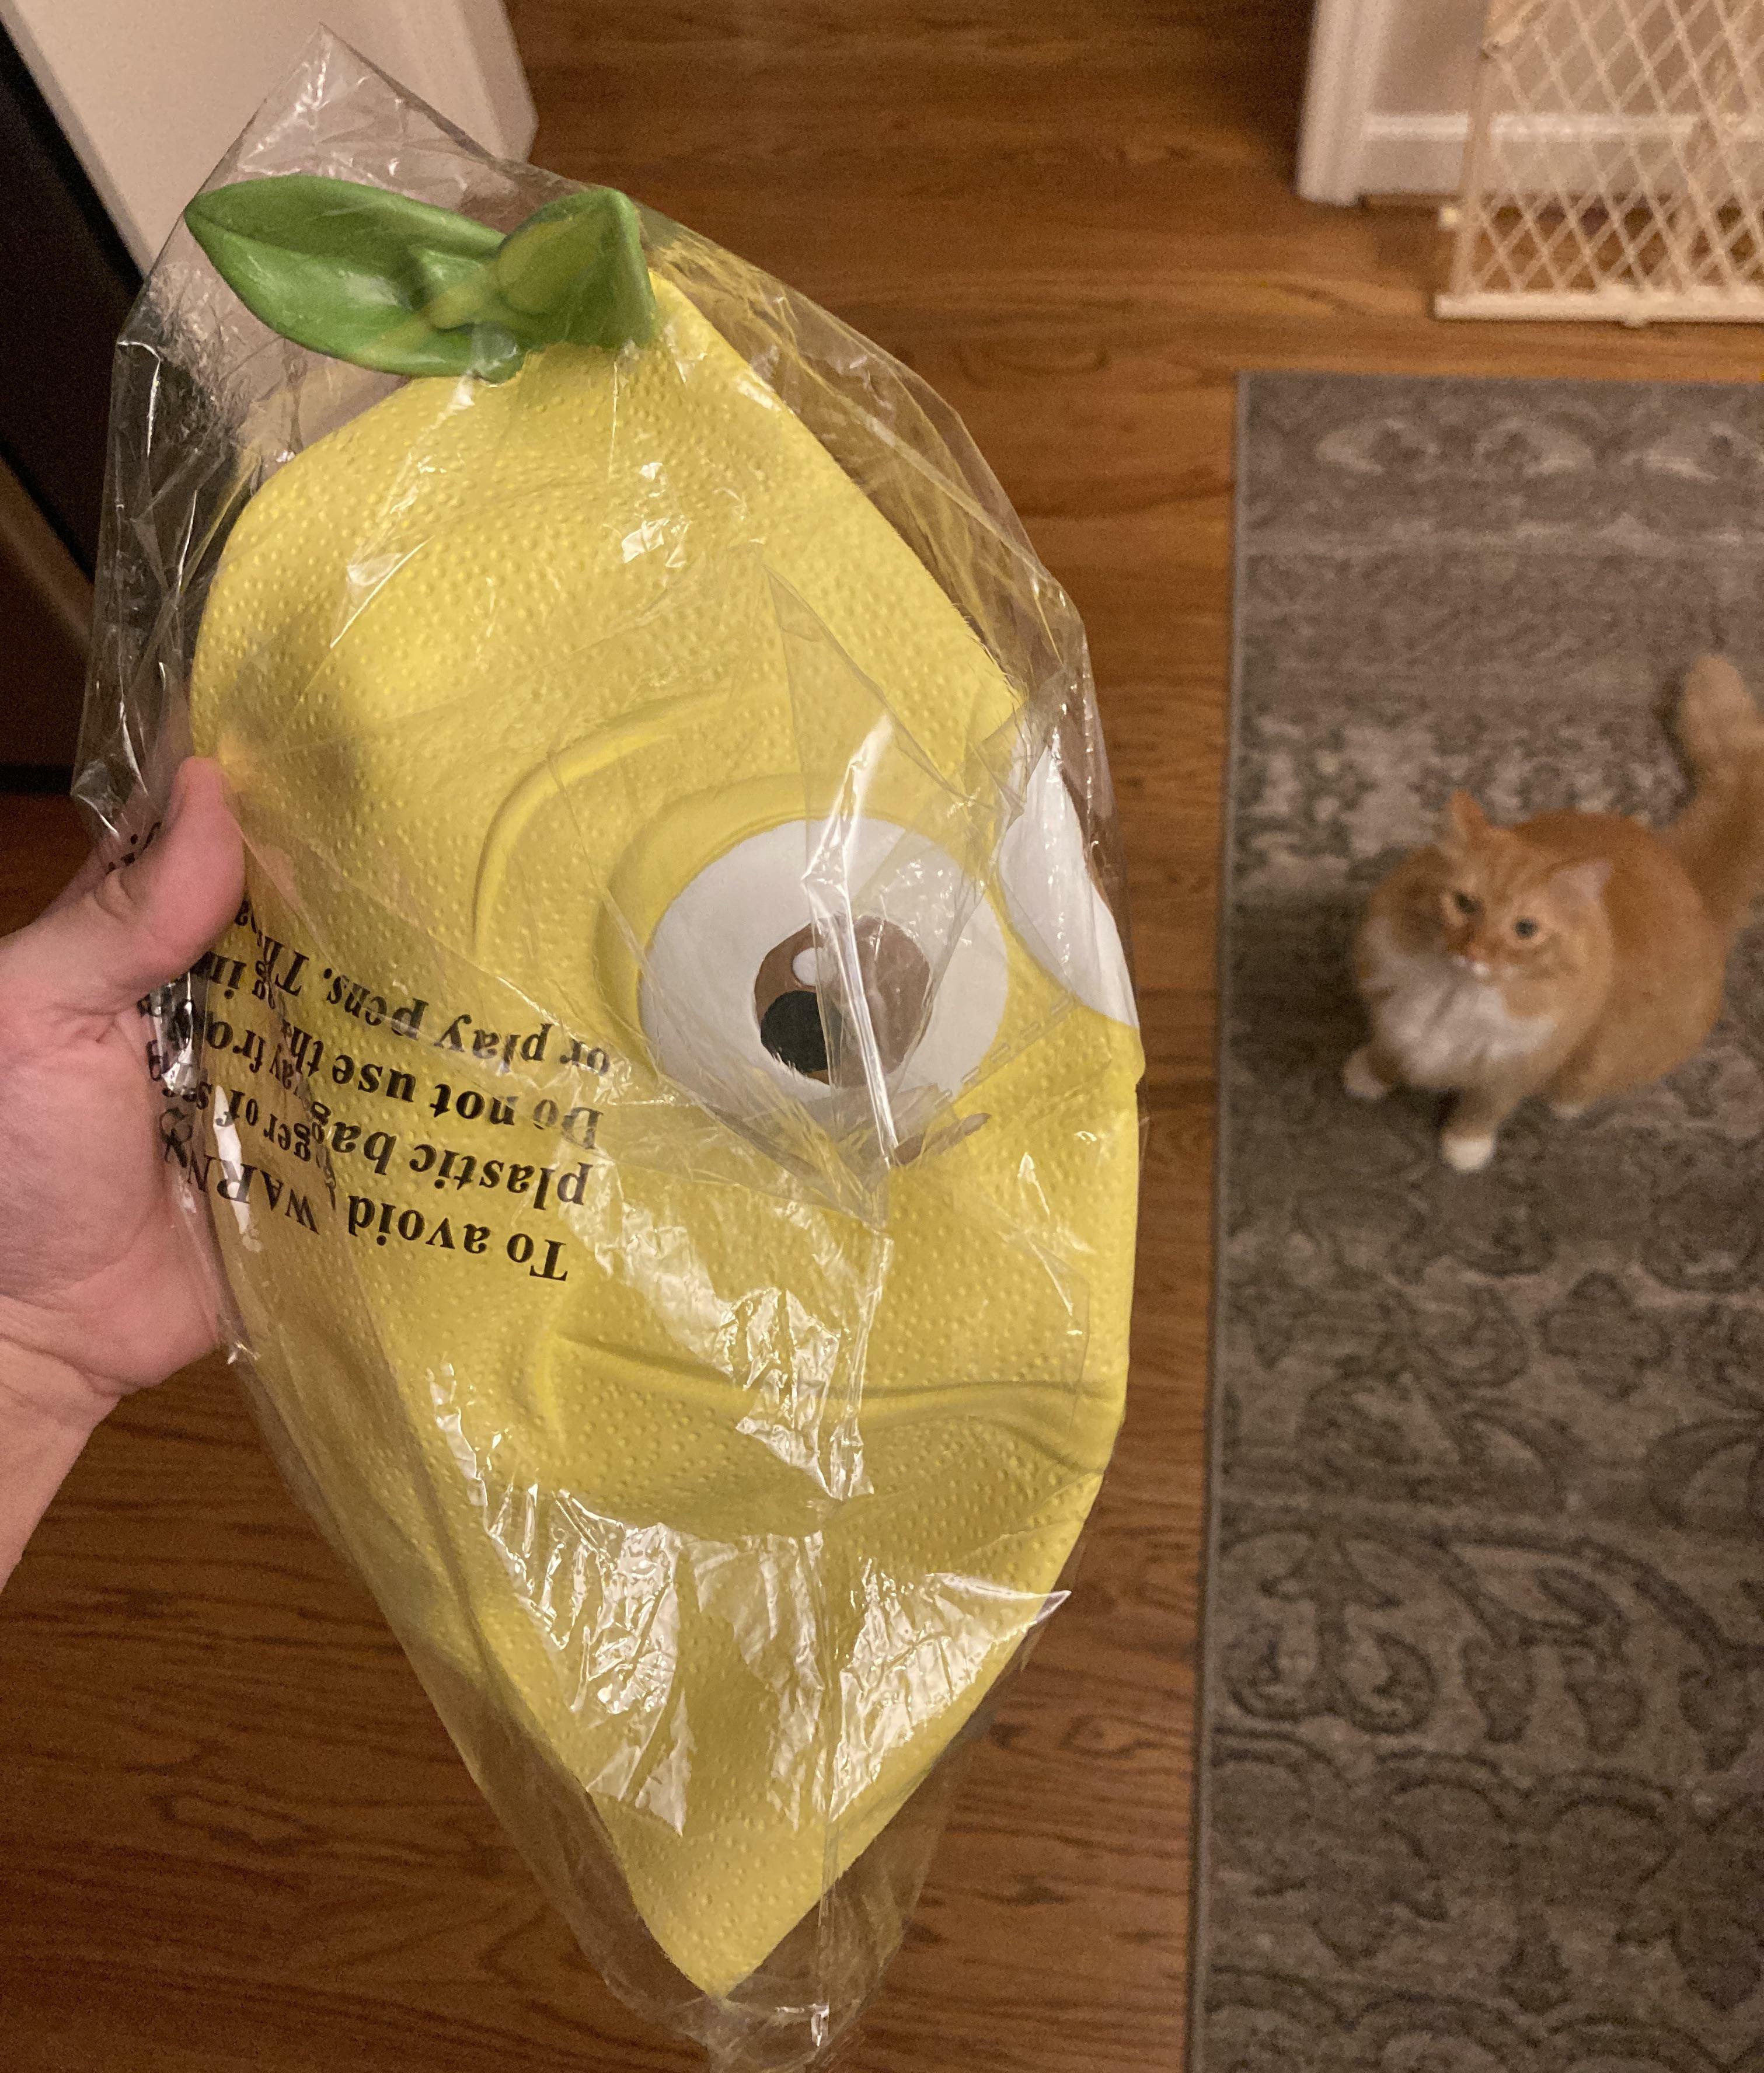 Bought A Giant Realistic Cat Mask Off Amazon To Try To Scare My Cat With And They Sent Me A Lemon Mask